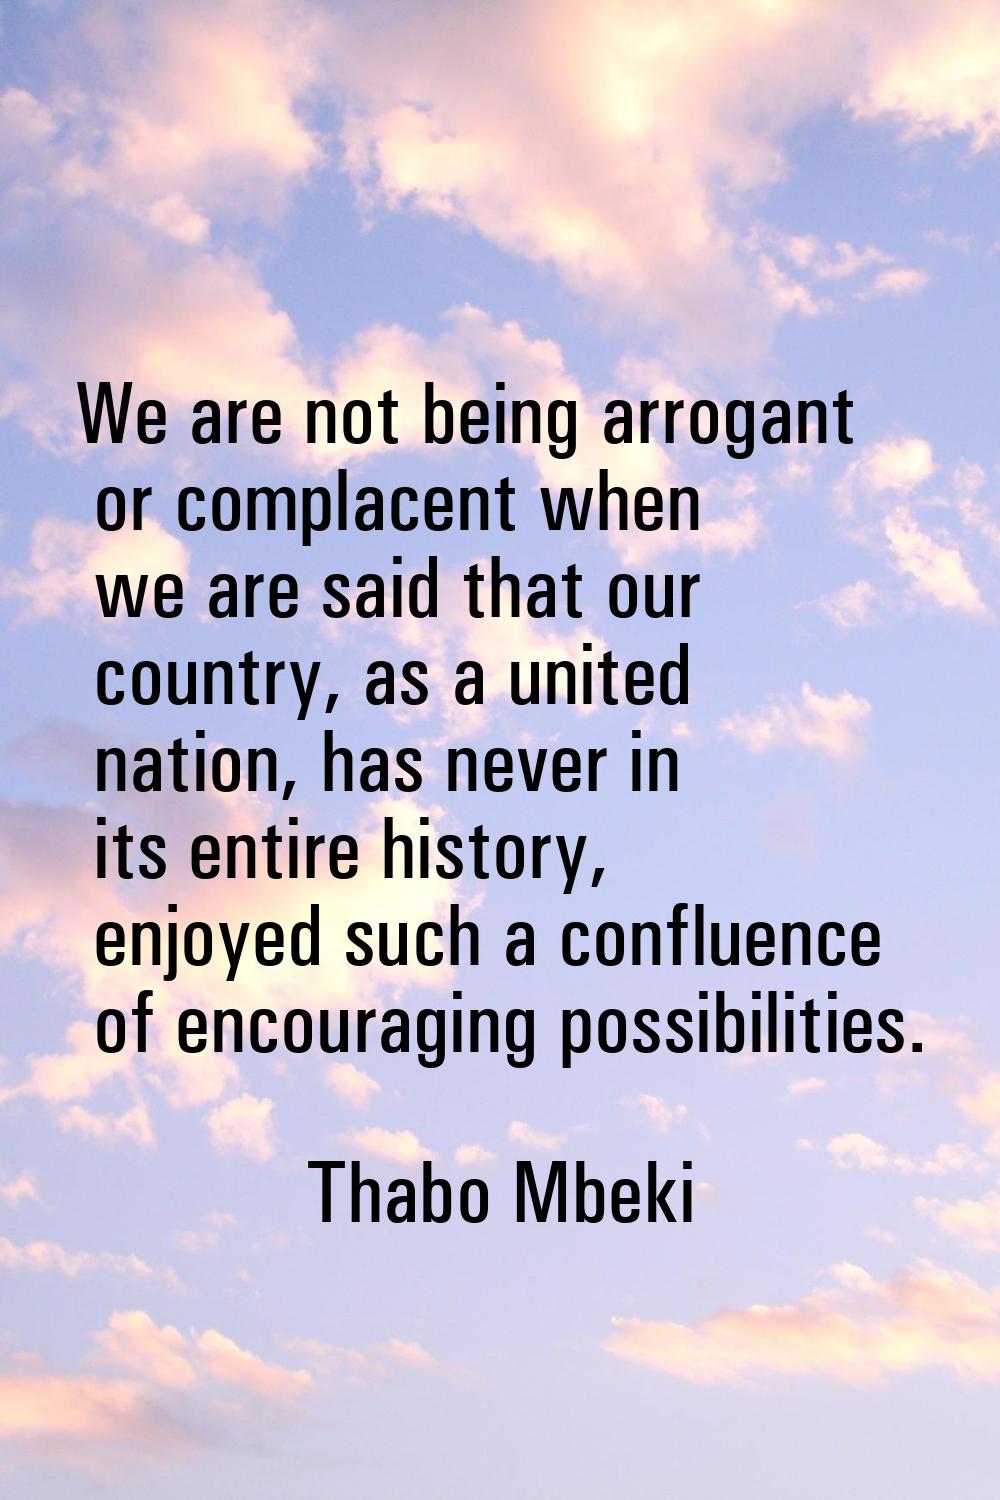 We are not being arrogant or complacent when we are said that our country, as a united nation, has 